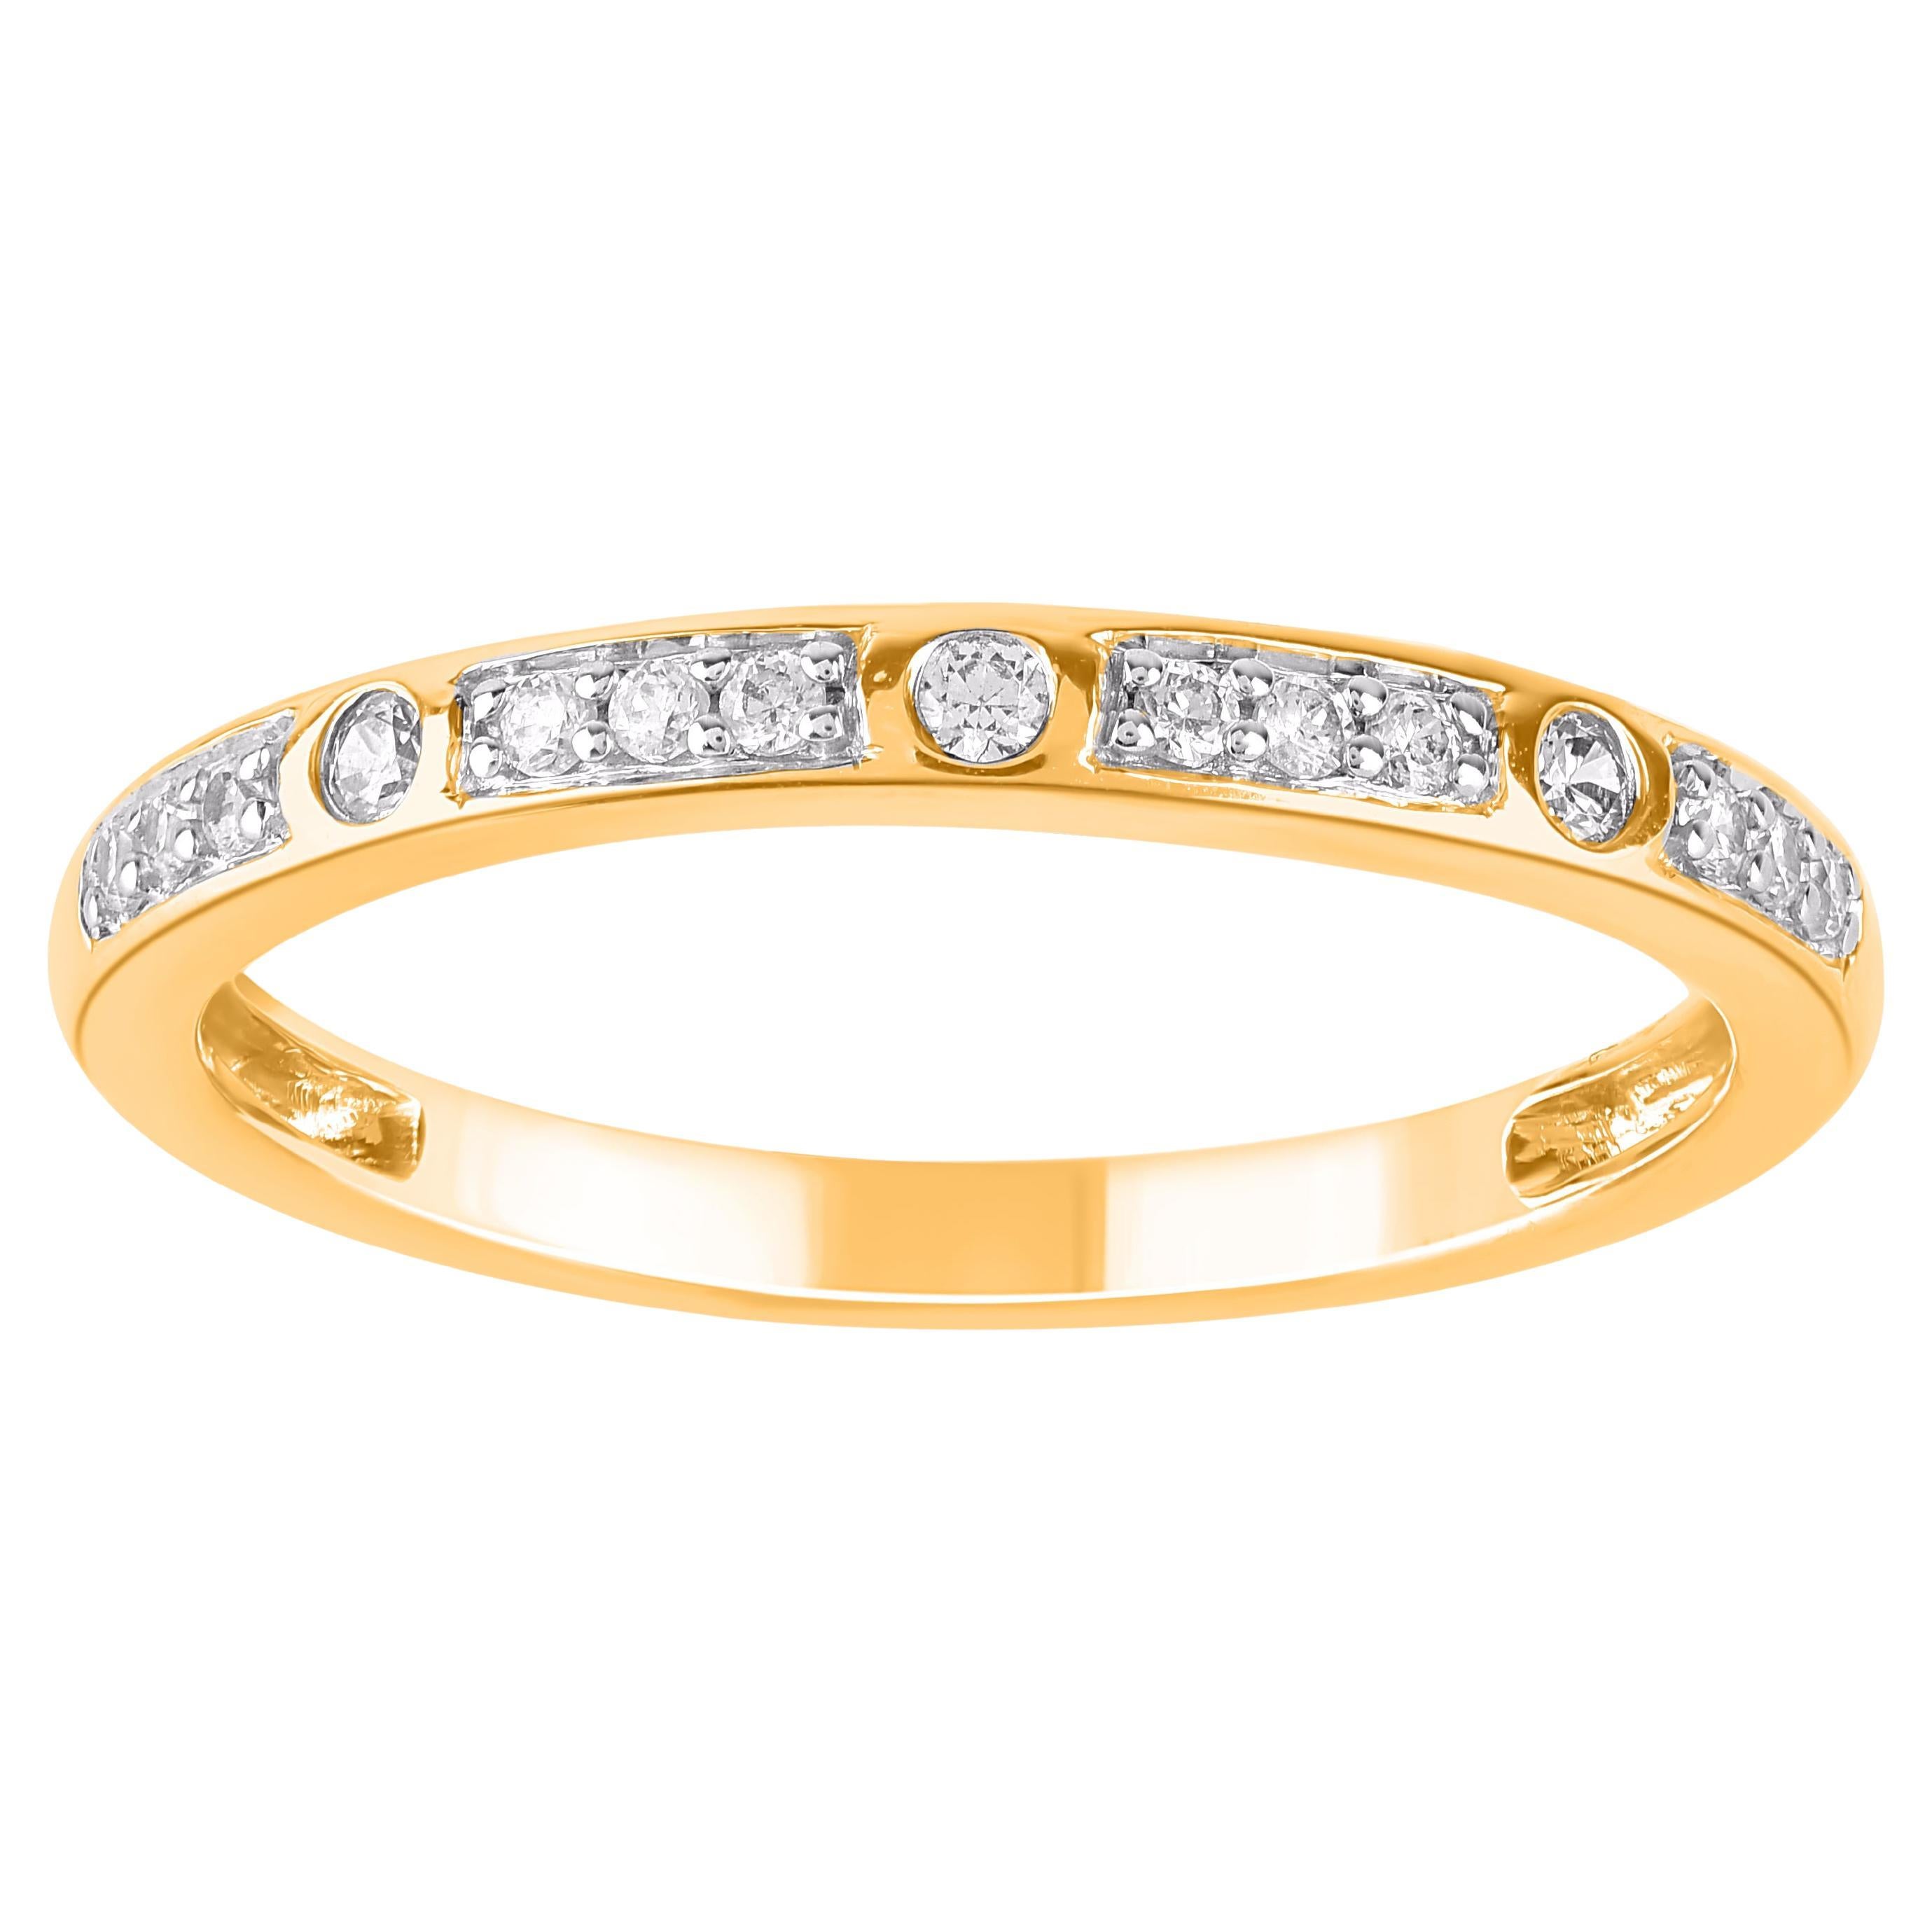 TJD 0.15 Carat Brilliant Cut Diamond 14 Karat Yellow Gold Stackable Band Ring For Sale